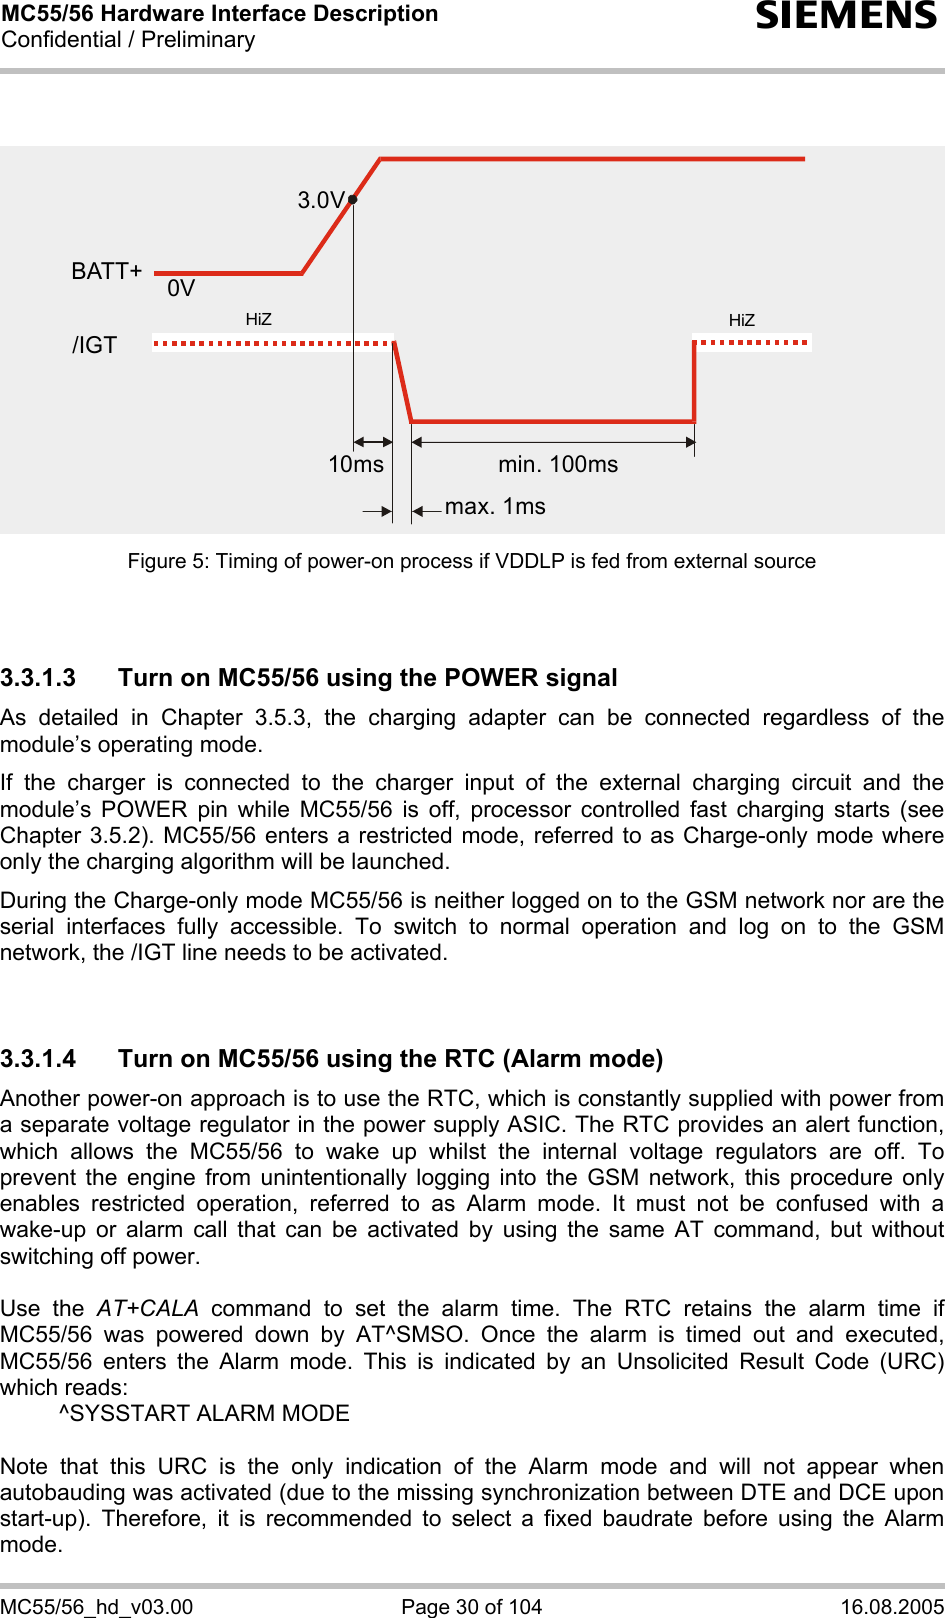 MC55/56 Hardware Interface Description Confidential / Preliminary s MC55/56_hd_v03.00  Page 30 of 104  16.08.2005 Figure 5: Timing of power-on process if VDDLP is fed from external source   3.3.1.3  Turn on MC55/56 using the POWER signal As detailed in Chapter 3.5.3, the charging adapter can be connected regardless of the module’s operating mode. If the charger is connected to the charger input of the external charging circuit and the module’s POWER pin while MC55/56 is off, processor controlled fast charging starts (see Chapter 3.5.2). MC55/56 enters a restricted mode, referred to as Charge-only mode where only the charging algorithm will be launched. During the Charge-only mode MC55/56 is neither logged on to the GSM network nor are the serial interfaces fully accessible. To switch to normal operation and log on to the GSM network, the /IGT line needs to be activated.   3.3.1.4  Turn on MC55/56 using the RTC (Alarm mode) Another power-on approach is to use the RTC, which is constantly supplied with power from a separate voltage regulator in the power supply ASIC. The RTC provides an alert function, which allows the MC55/56 to wake up whilst the internal voltage regulators are off. To prevent the engine from unintentionally logging into the GSM network, this procedure only enables restricted operation, referred to as Alarm mode. It must not be confused with a wake-up or alarm call that can be activated by using the same AT command, but without switching off power.  Use the AT+CALA command to set the alarm time. The RTC retains the alarm time if MC55/56 was powered down by AT^SMSO. Once the alarm is timed out and executed, MC55/56 enters the Alarm mode. This is indicated by an Unsolicited Result Code (URC) which reads:   ^SYSSTART ALARM MODE    Note that this URC is the only indication of the Alarm mode and will not appear when autobauding was activated (due to the missing synchronization between DTE and DCE upon start-up). Therefore, it is recommended to select a fixed baudrate before using the Alarm mode.  3.0V0Vmin. 100msmax. 1ms10msHiZHiZBATT+/IGT